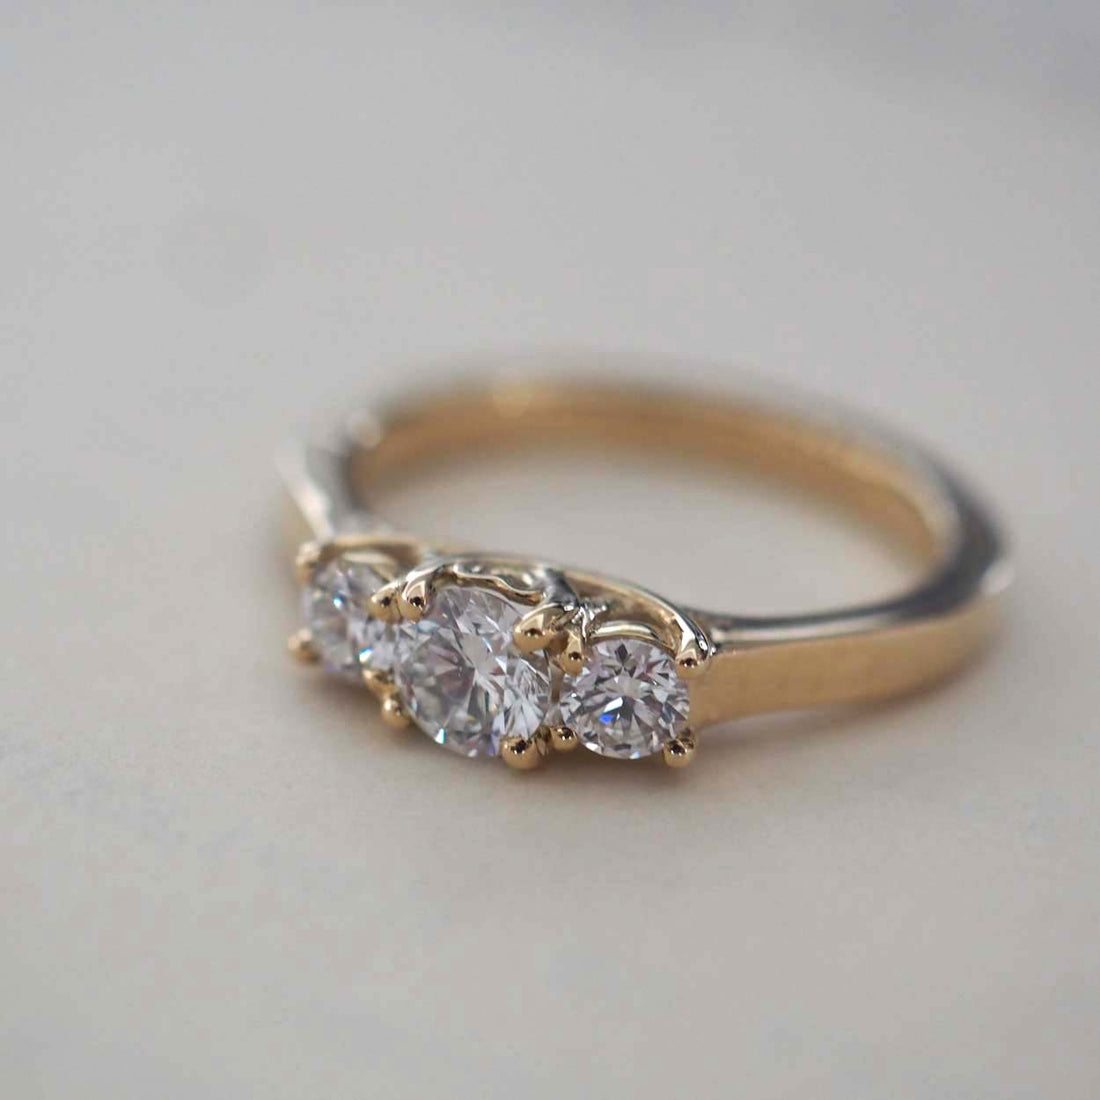 Bespoke Round Diamond Engagement Ring with Customisable Semi-Precious Side Stones and Secret Heart Detail in Recycled Yellow Gold, Handcrafted in London by Bianca Jones 